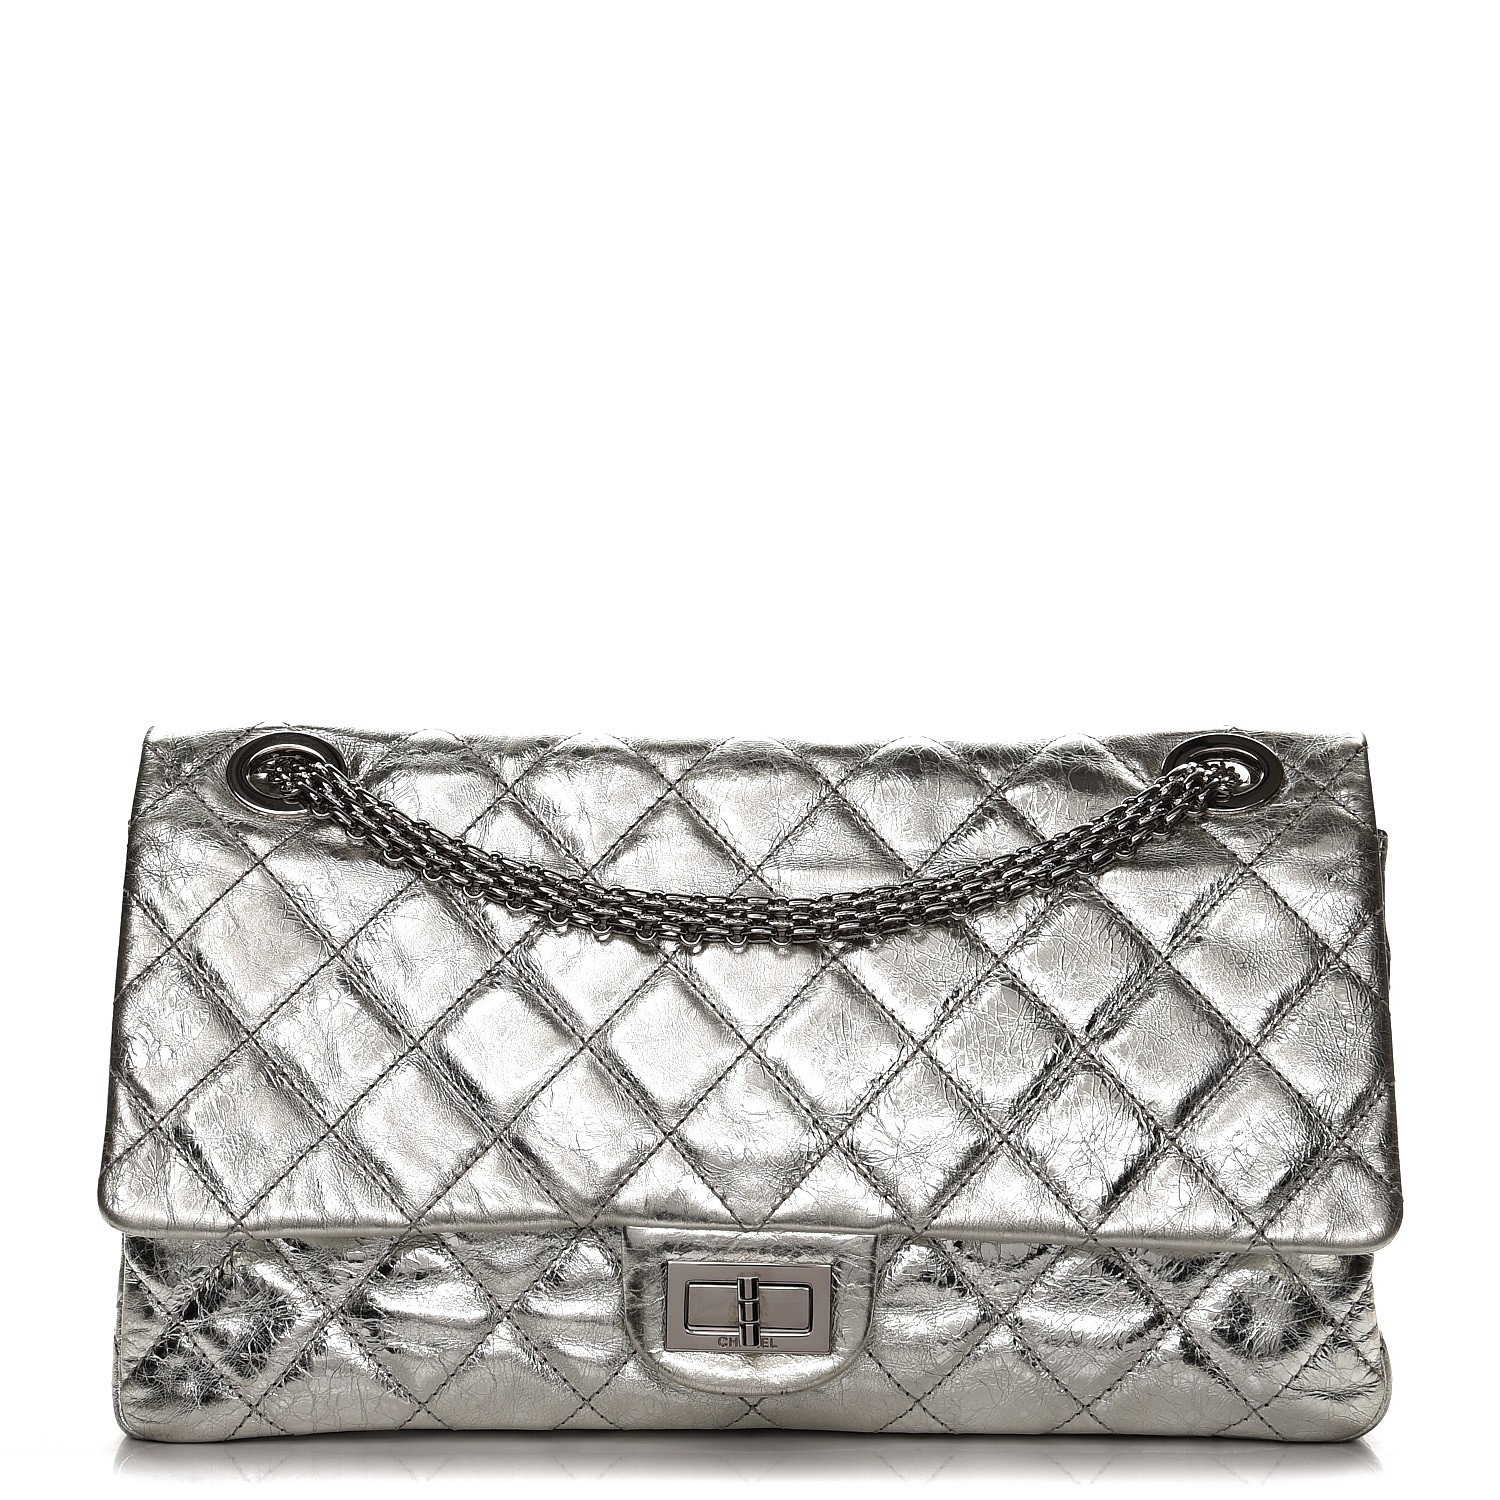 CHANEL Metallic Aged Calfskin Quilted 2.55 Reissue 228 Flap Silver 223655